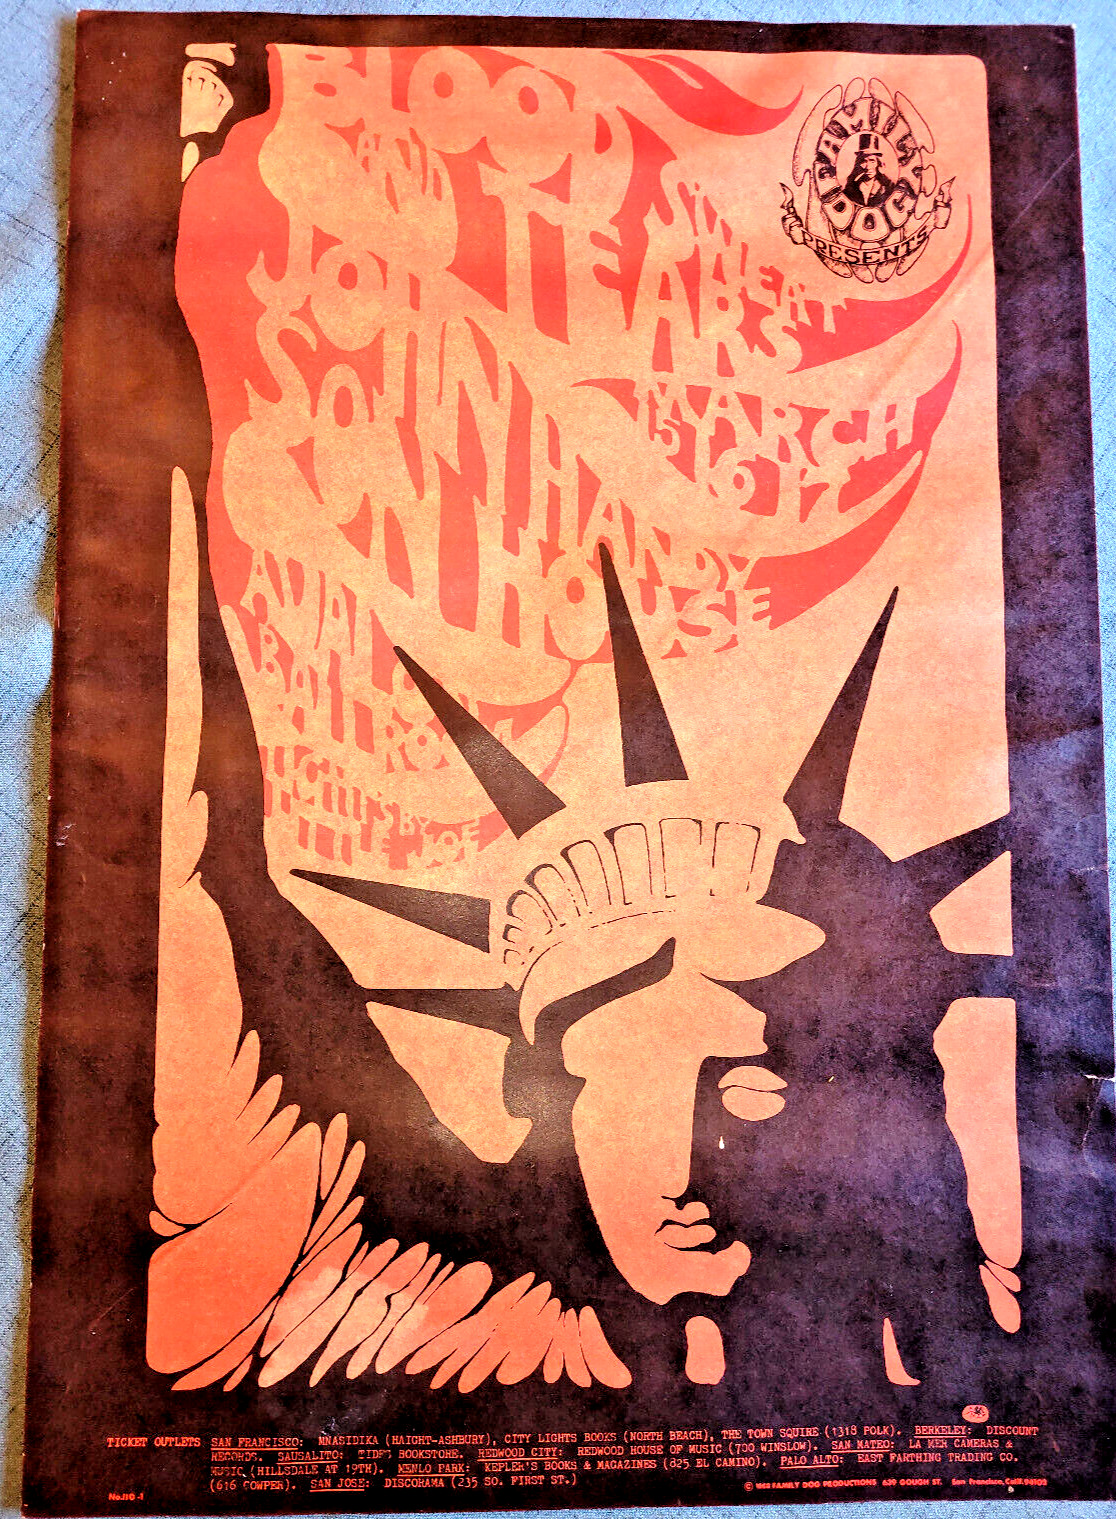 Psychedelic Avalon Family Dog Poster FD 110 Blood Sweat & Tears 1968 John Handy